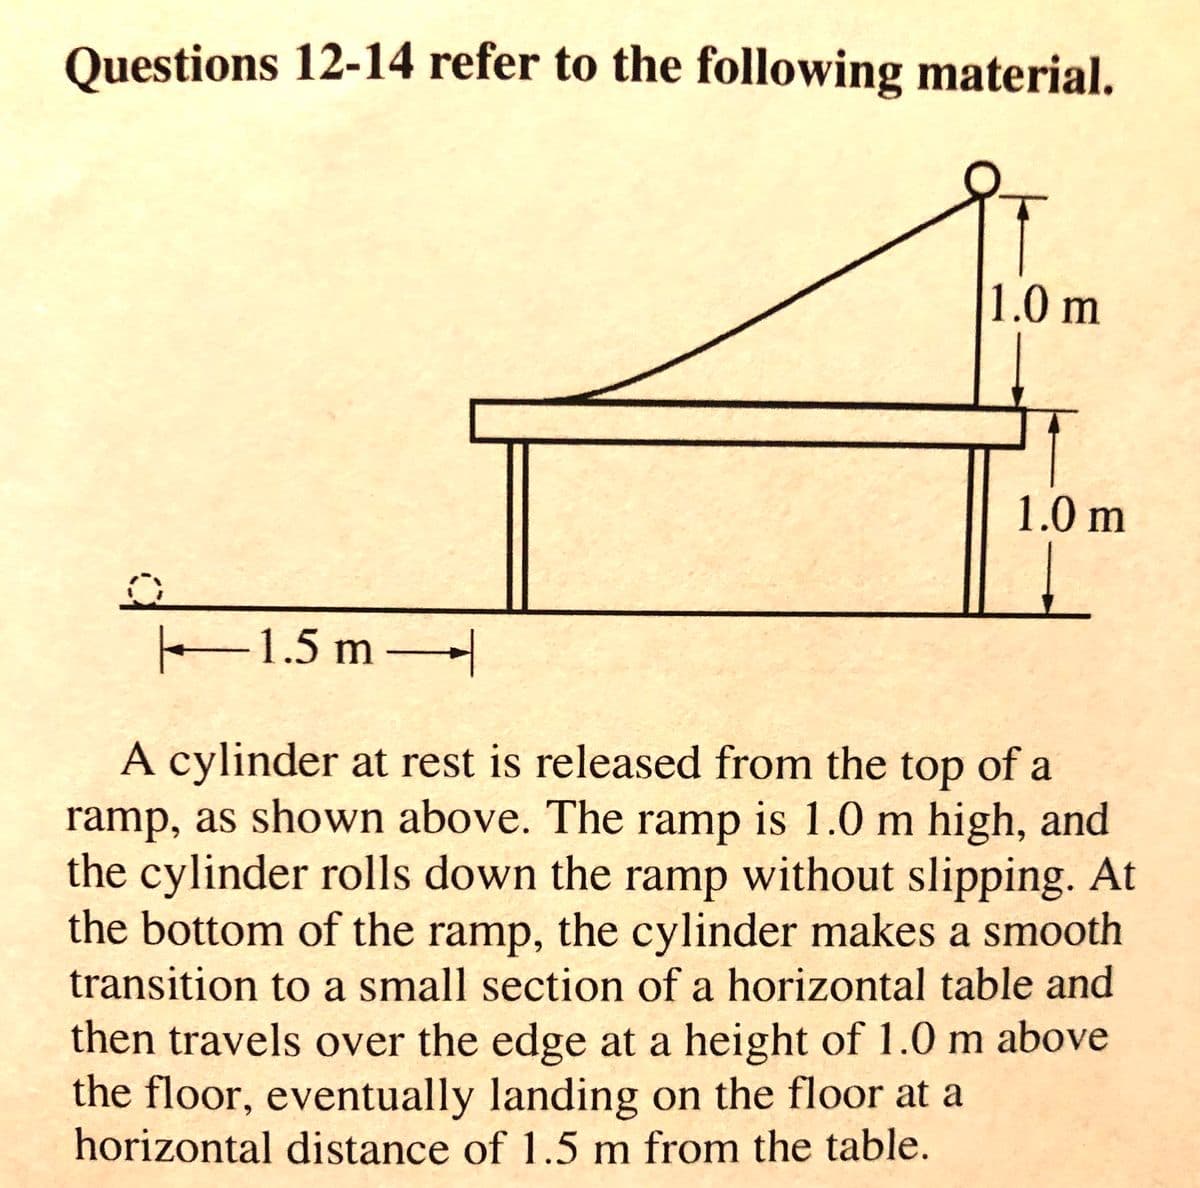 Questions 12-14 refer to the following material.
1.0 m
1.0 m
1.5 m
A cylinder at rest is released from the top of a
ramp, as shown above. The ramp is 1.0 m high, and
the cylinder rolls down the ramp without slipping. At
the bottom of the ramp, the cylinder makes a smooth
transition to a small section of a horizontal table and
then travels over the edge at a height of 1.0 m above
the floor, eventually landing on the floor at a
horizontal distance of 1.5 m from the table.
